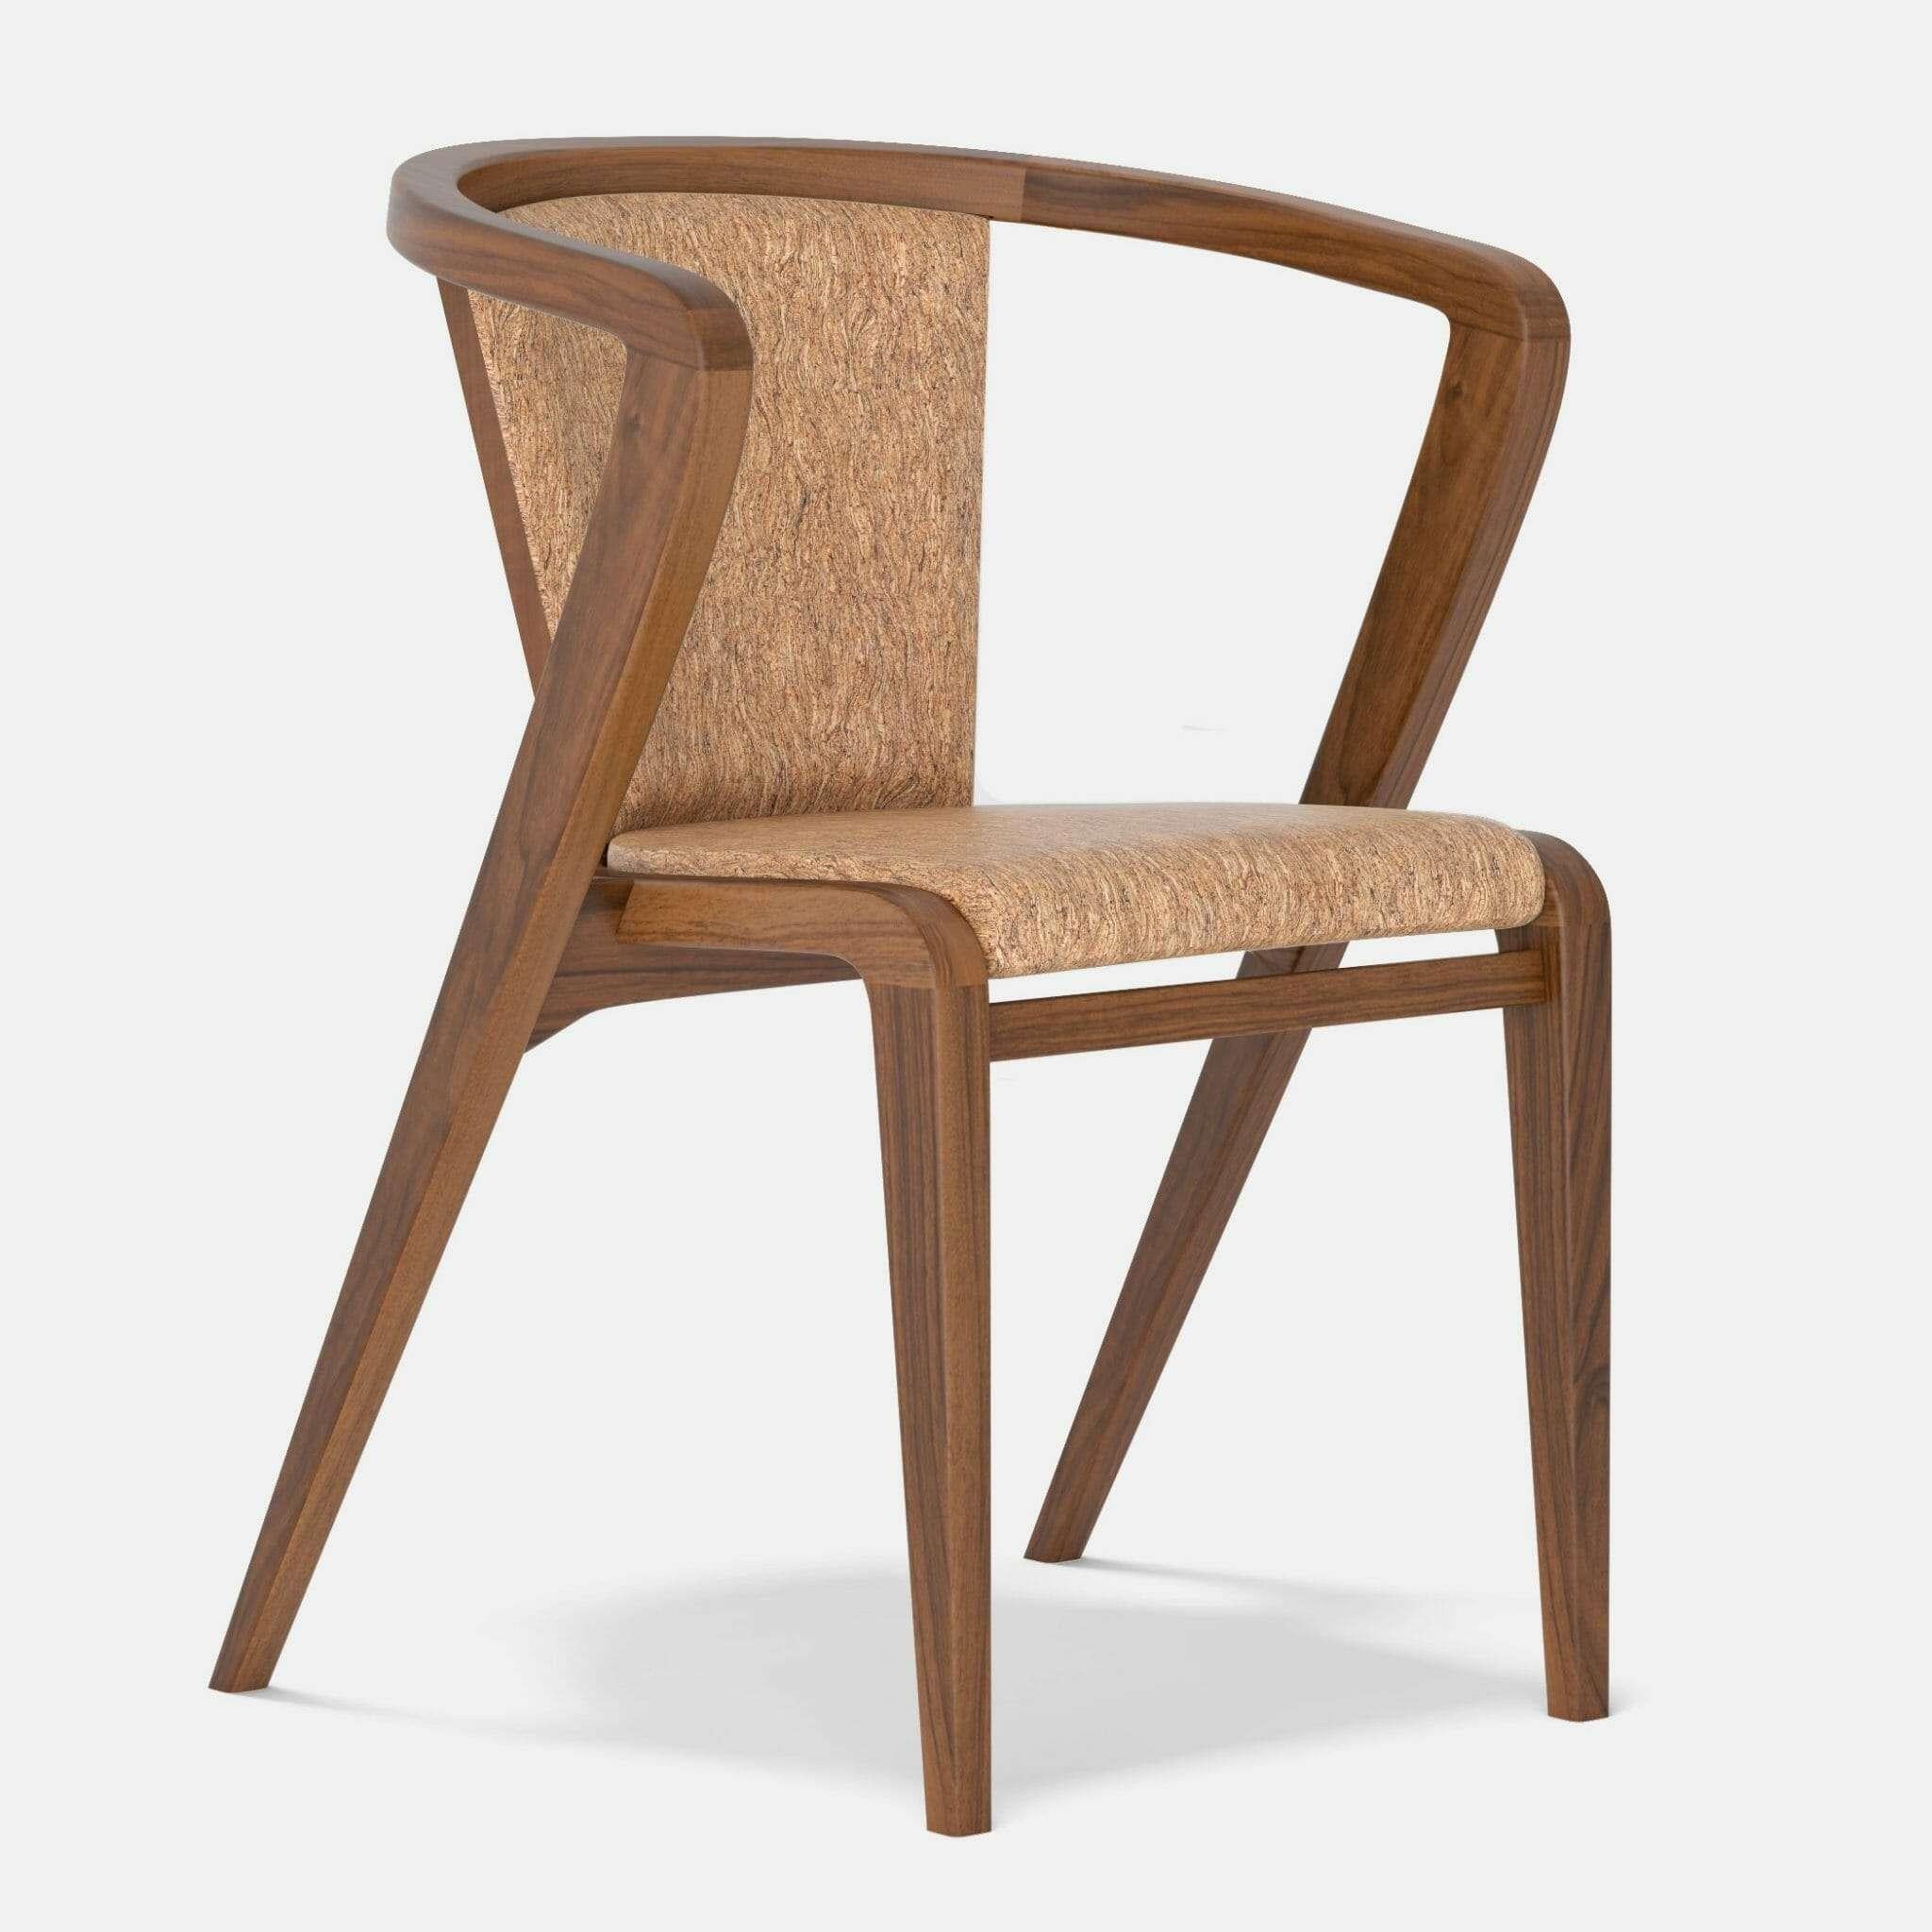 Organic Modern Ash and Fabric Portuguese Roots Chair by Alexandre Caldas